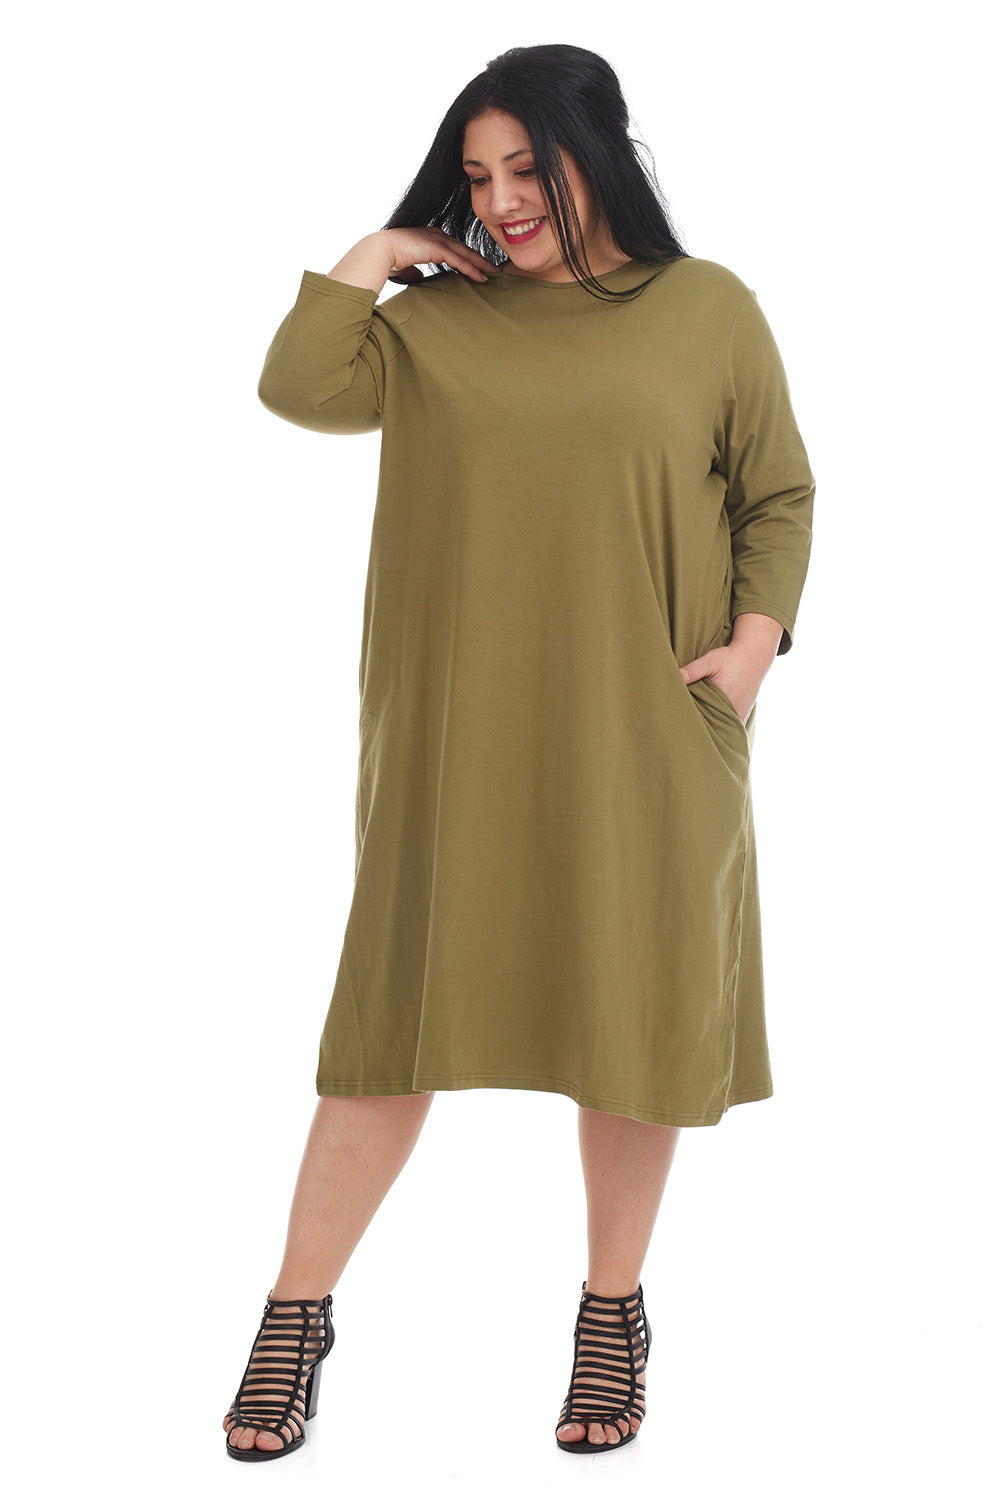 Soft and cozy cotton olive green plus size t-shirt dress with pockets. modest 3/4 sleeves and knee length